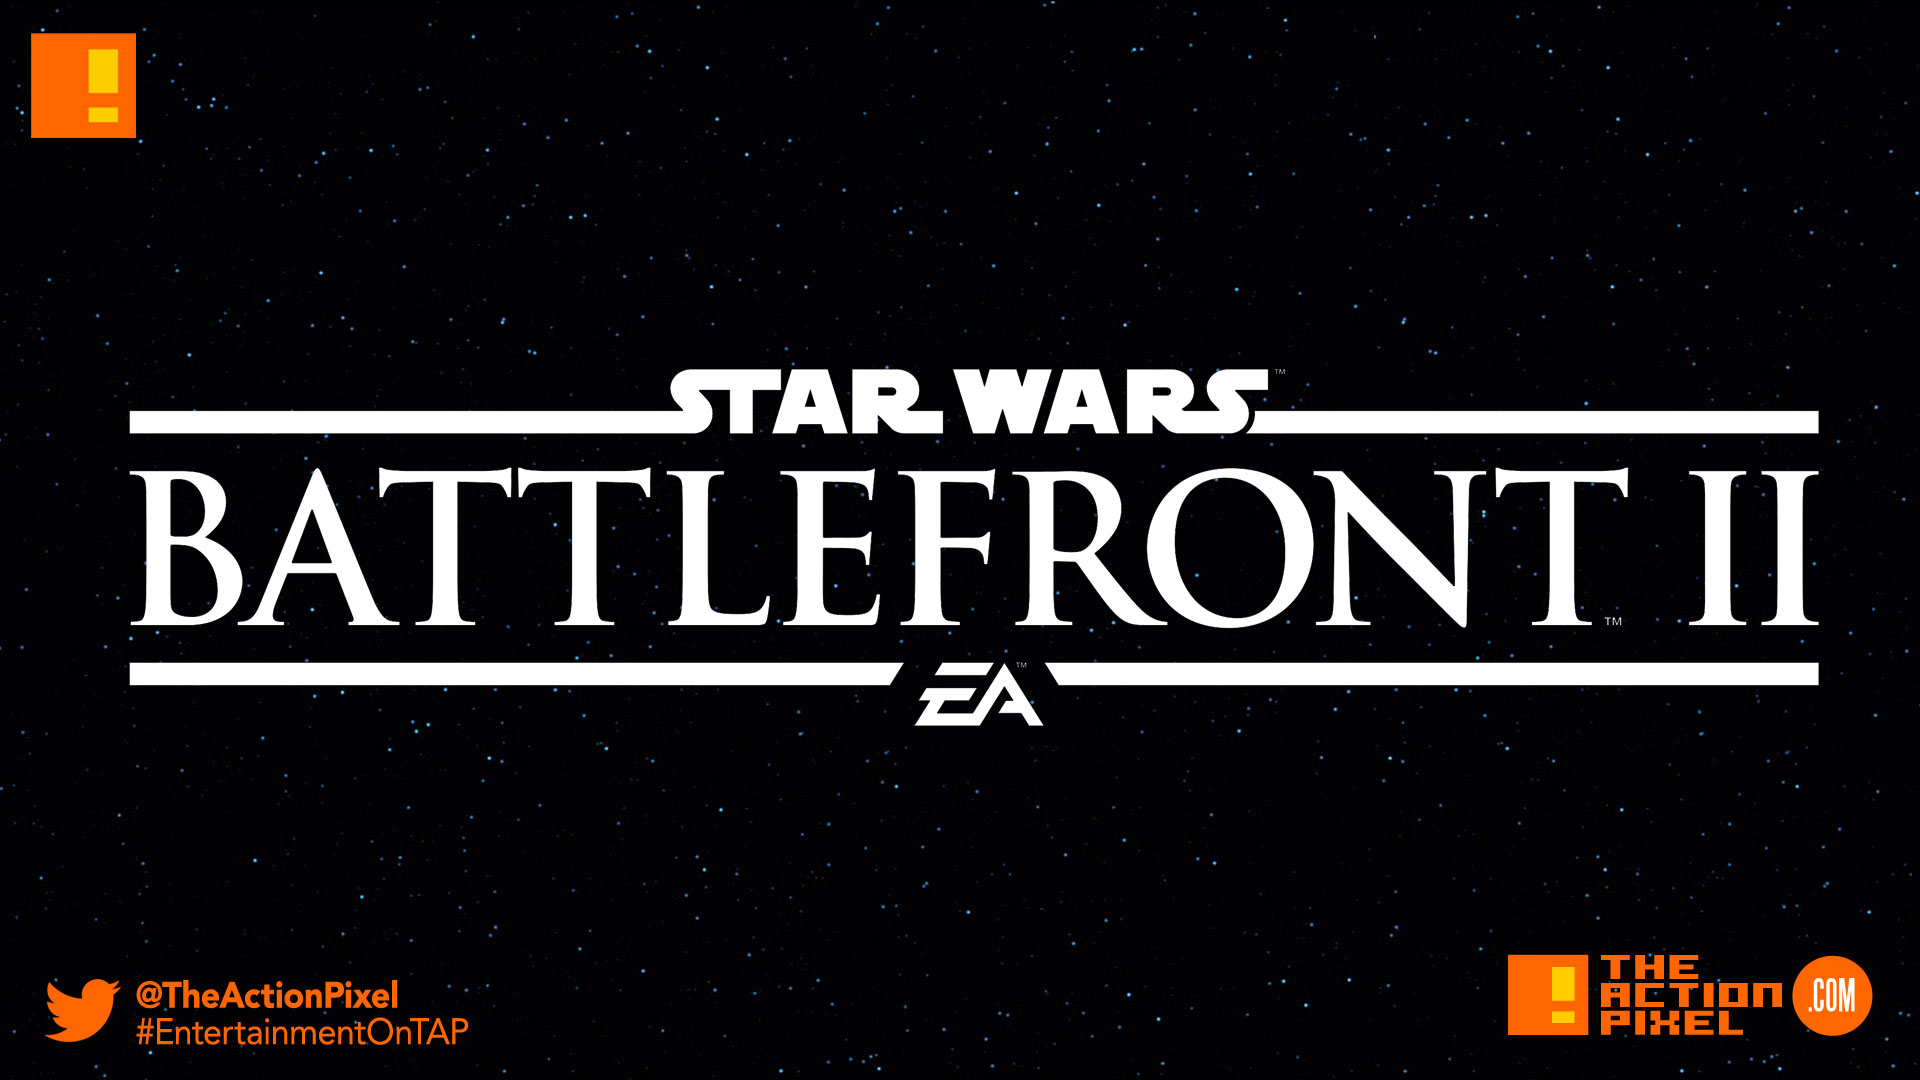 battlefront 2,star wars, ea, electronic arts, dice ea, dice, ea games, star wars: battlefront 2, star wars: battlefront II, star wars battlefront,star wars battlefront 2, the action pixel,entertainment on tap